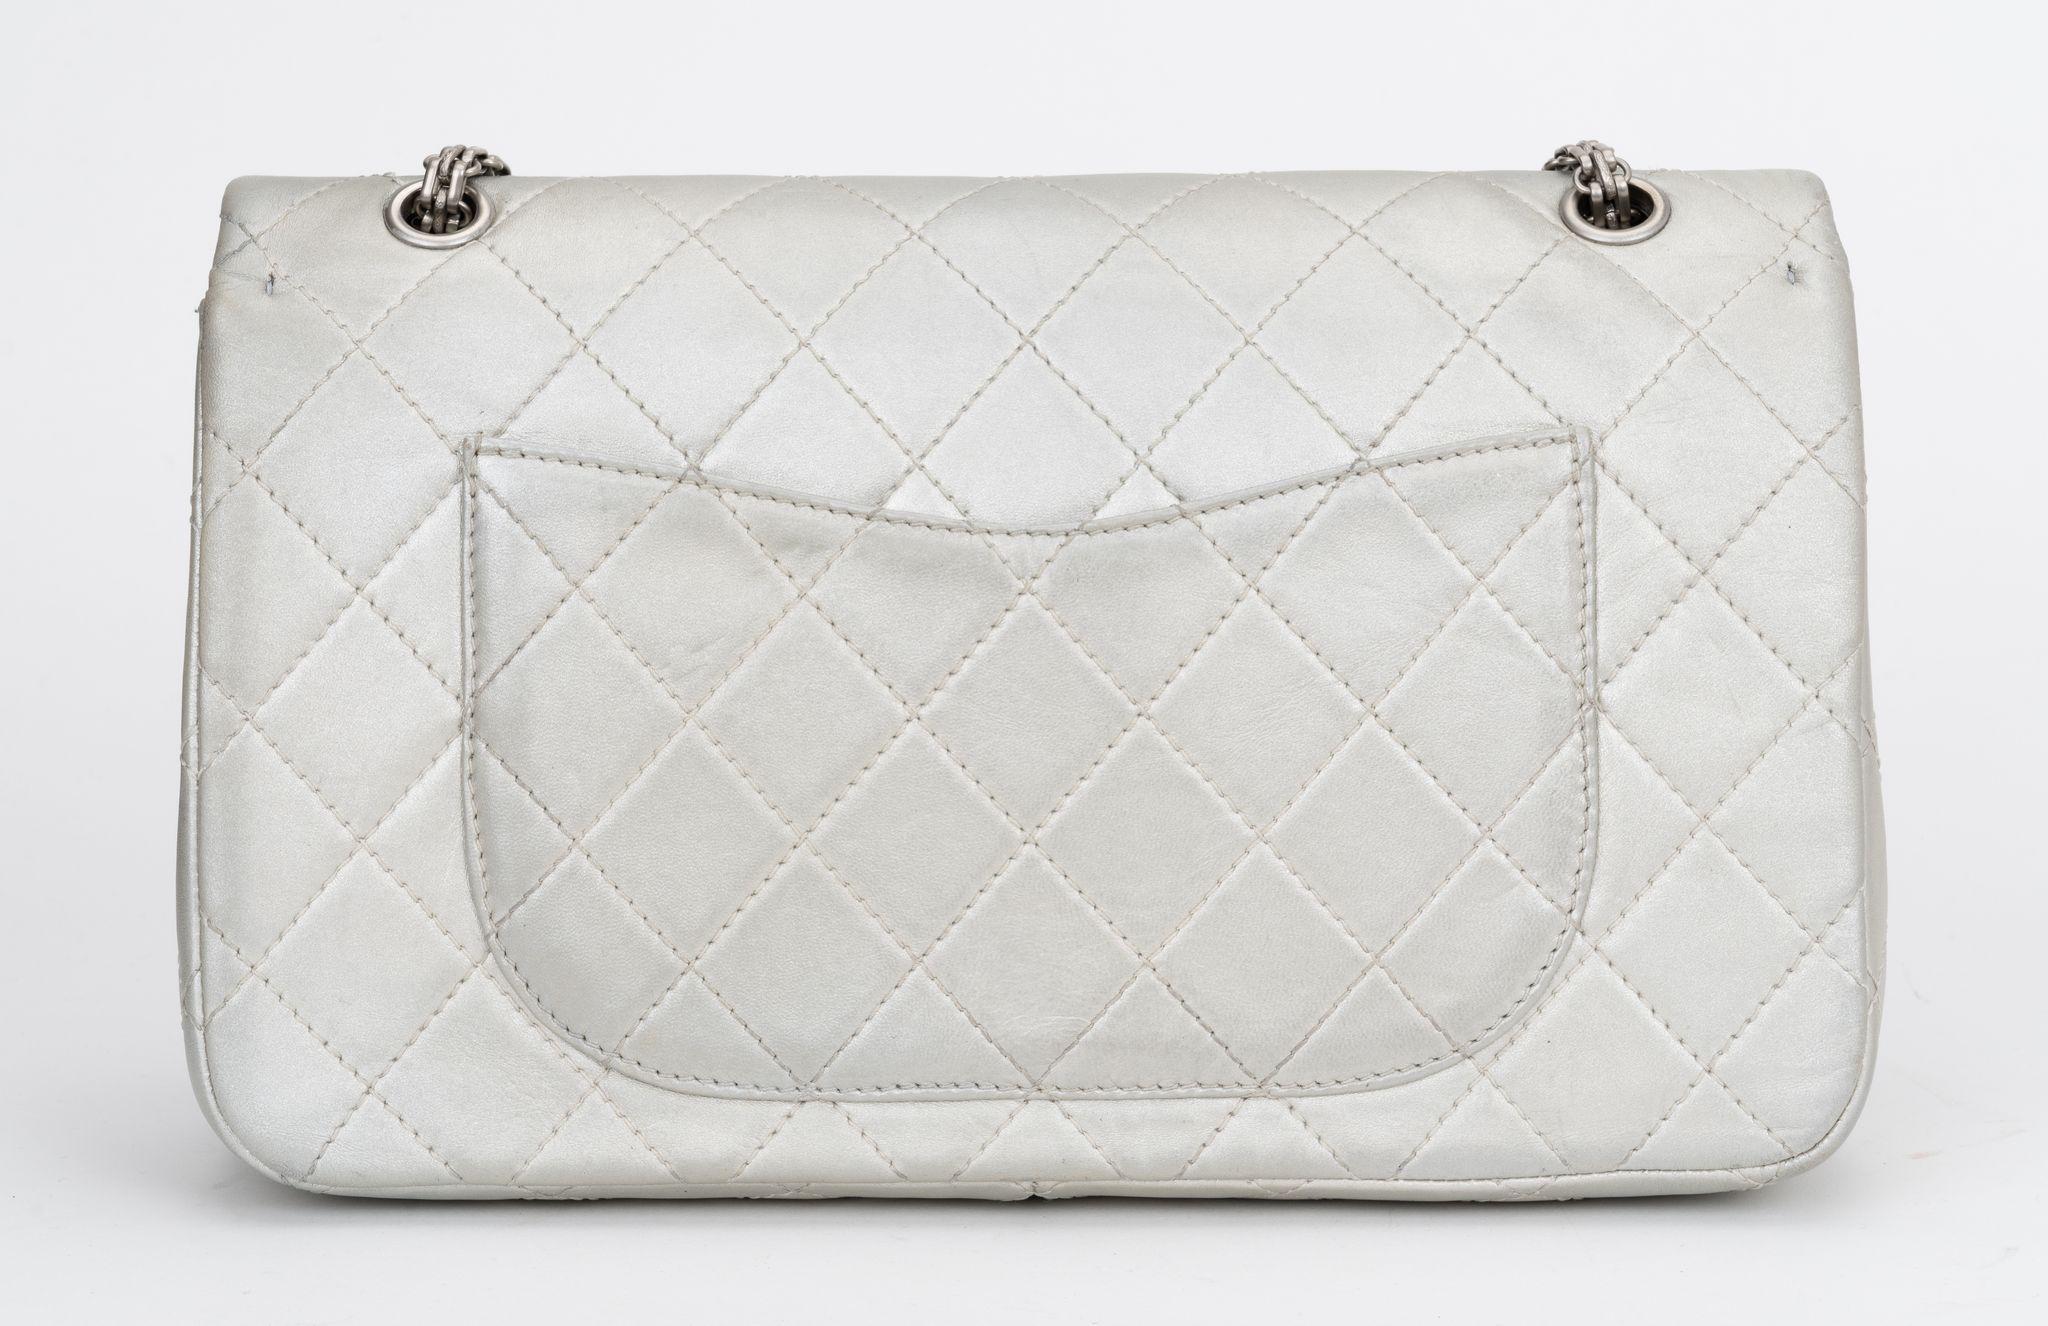 Chanel Jumbo Reissue Silver Double Flap In Good Condition For Sale In West Hollywood, CA